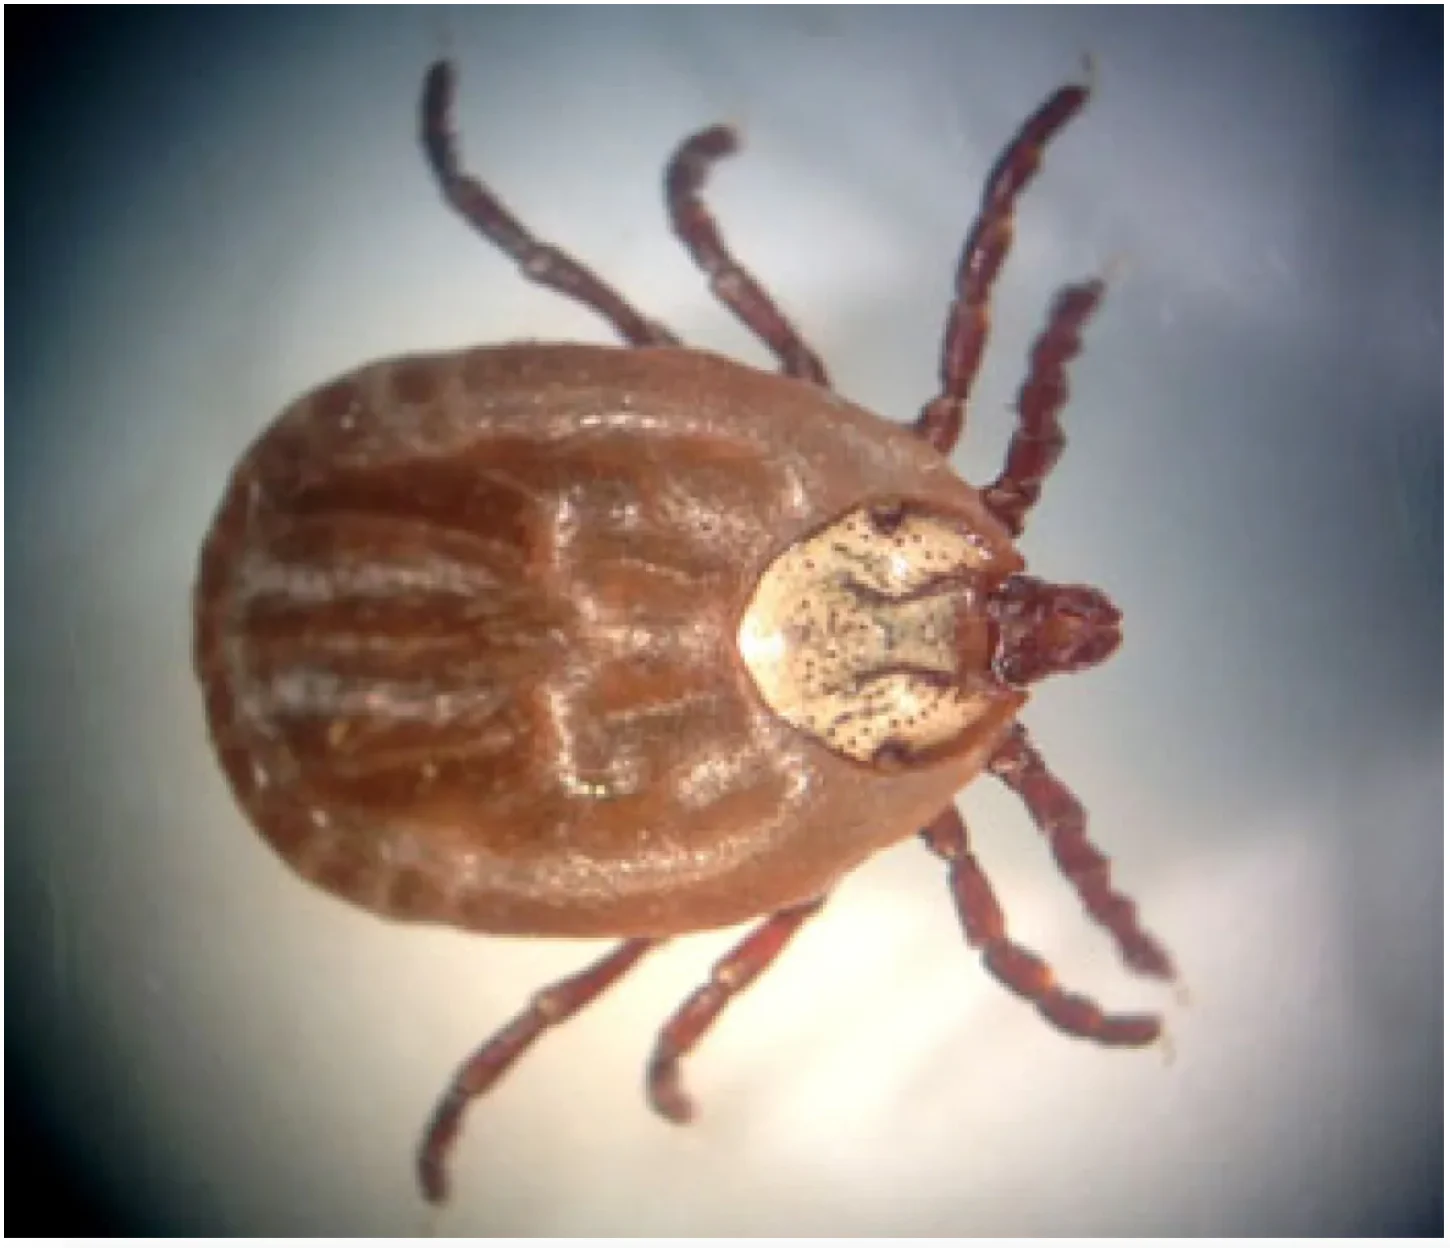 The female Rocky Mountain wood tick has a white shield near its head. (Government on B.C.)